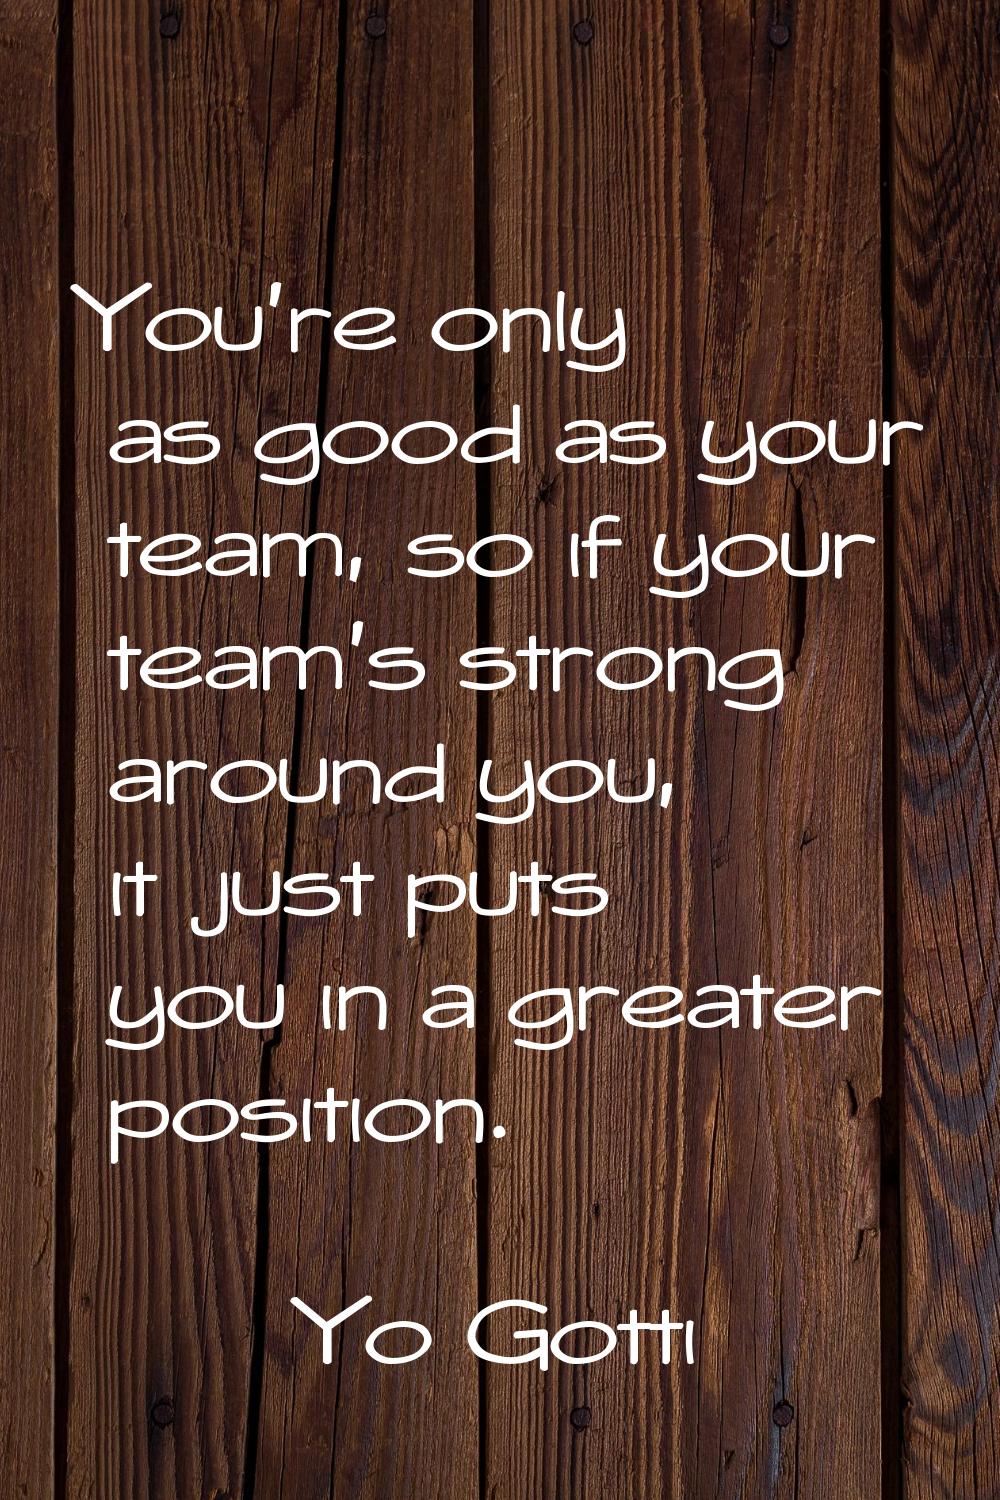 You're only as good as your team, so if your team's strong around you, it just puts you in a greate